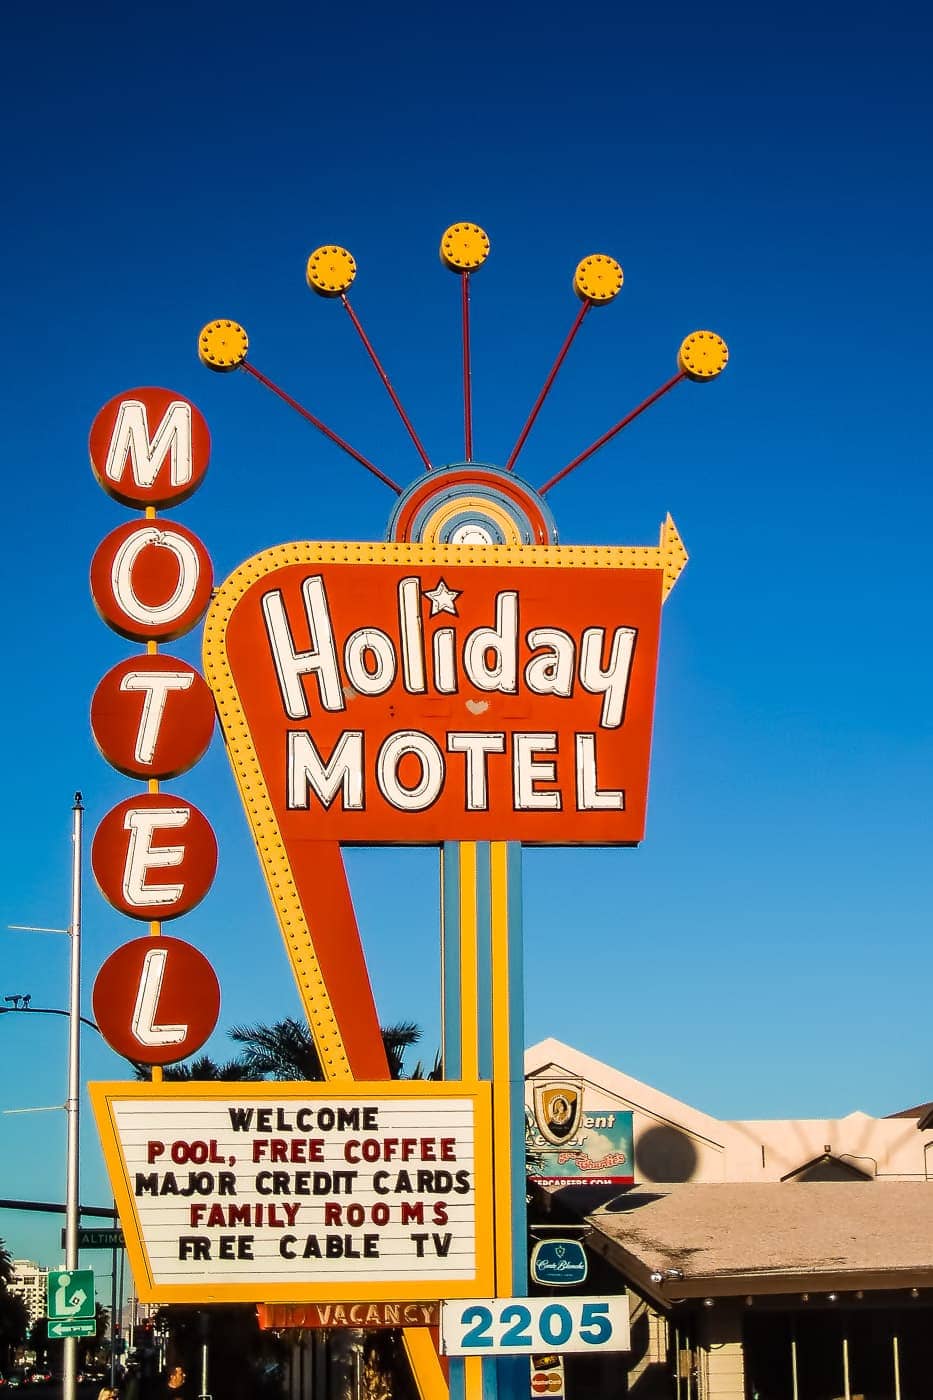 The Holiday Motel's sign in Las Vegas.